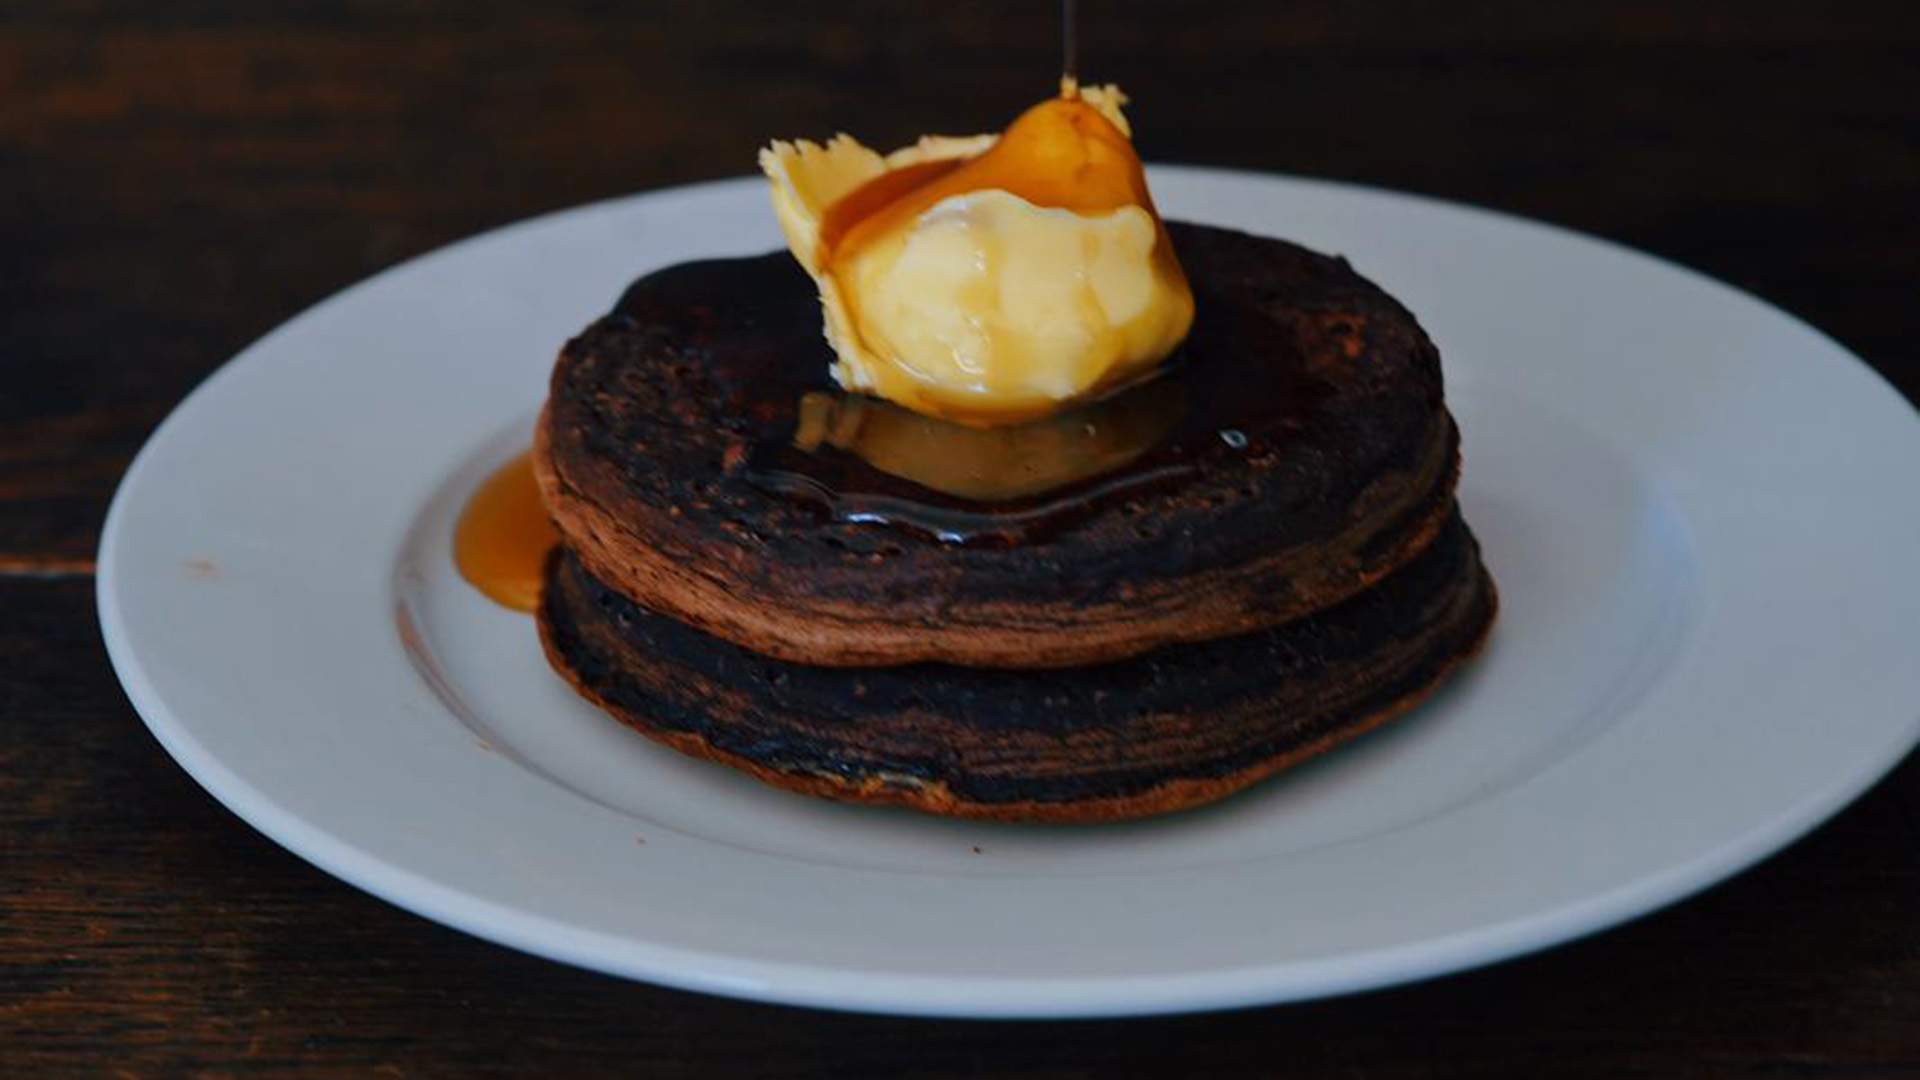 Pepe Saya and Crumpets by Merna Are Now Delivering Lush Breakfast Boxes Across Australia